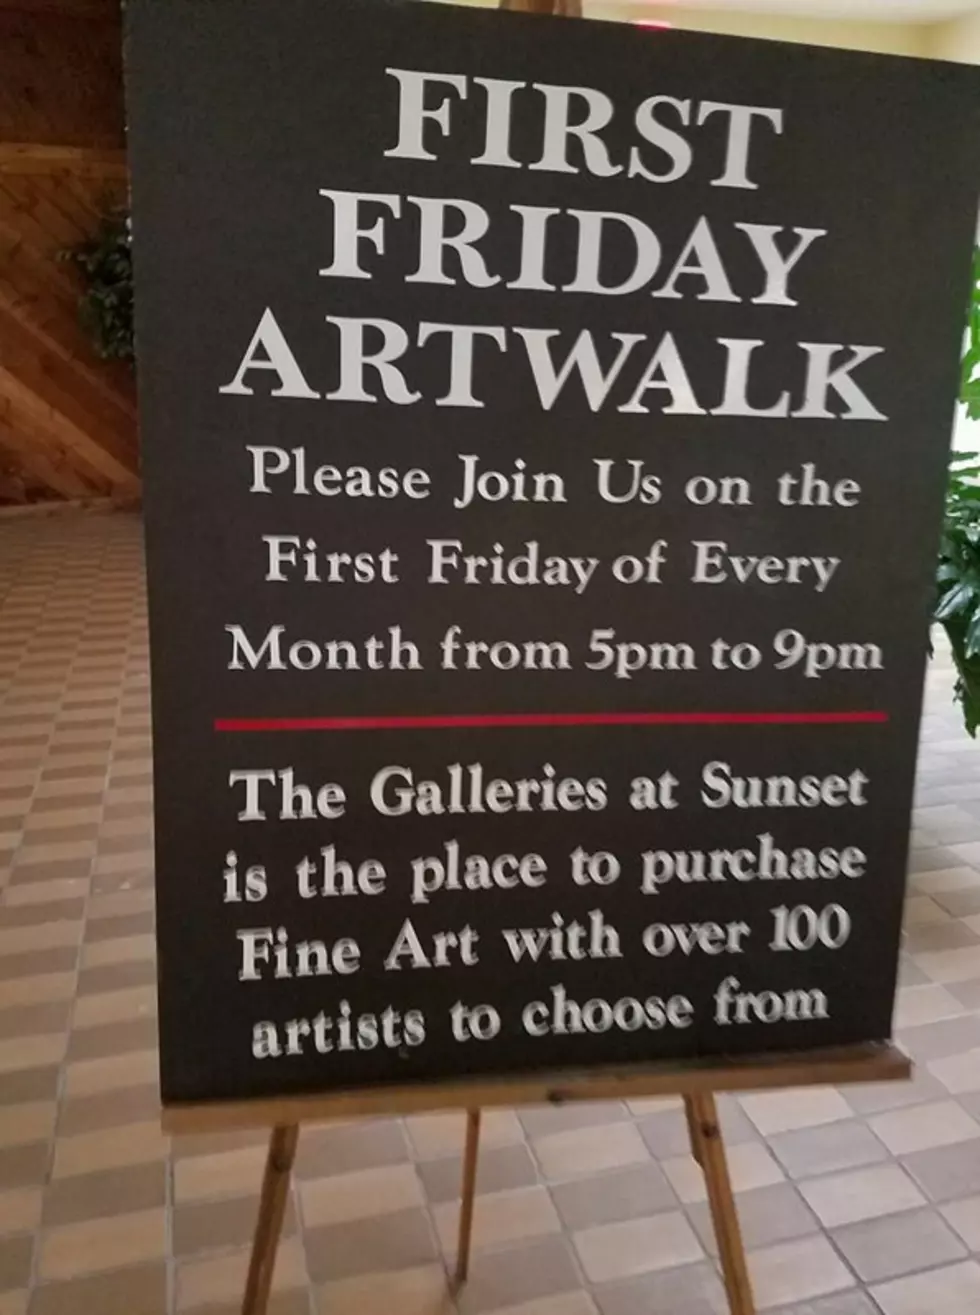 Why You Should Go On The Art Walk